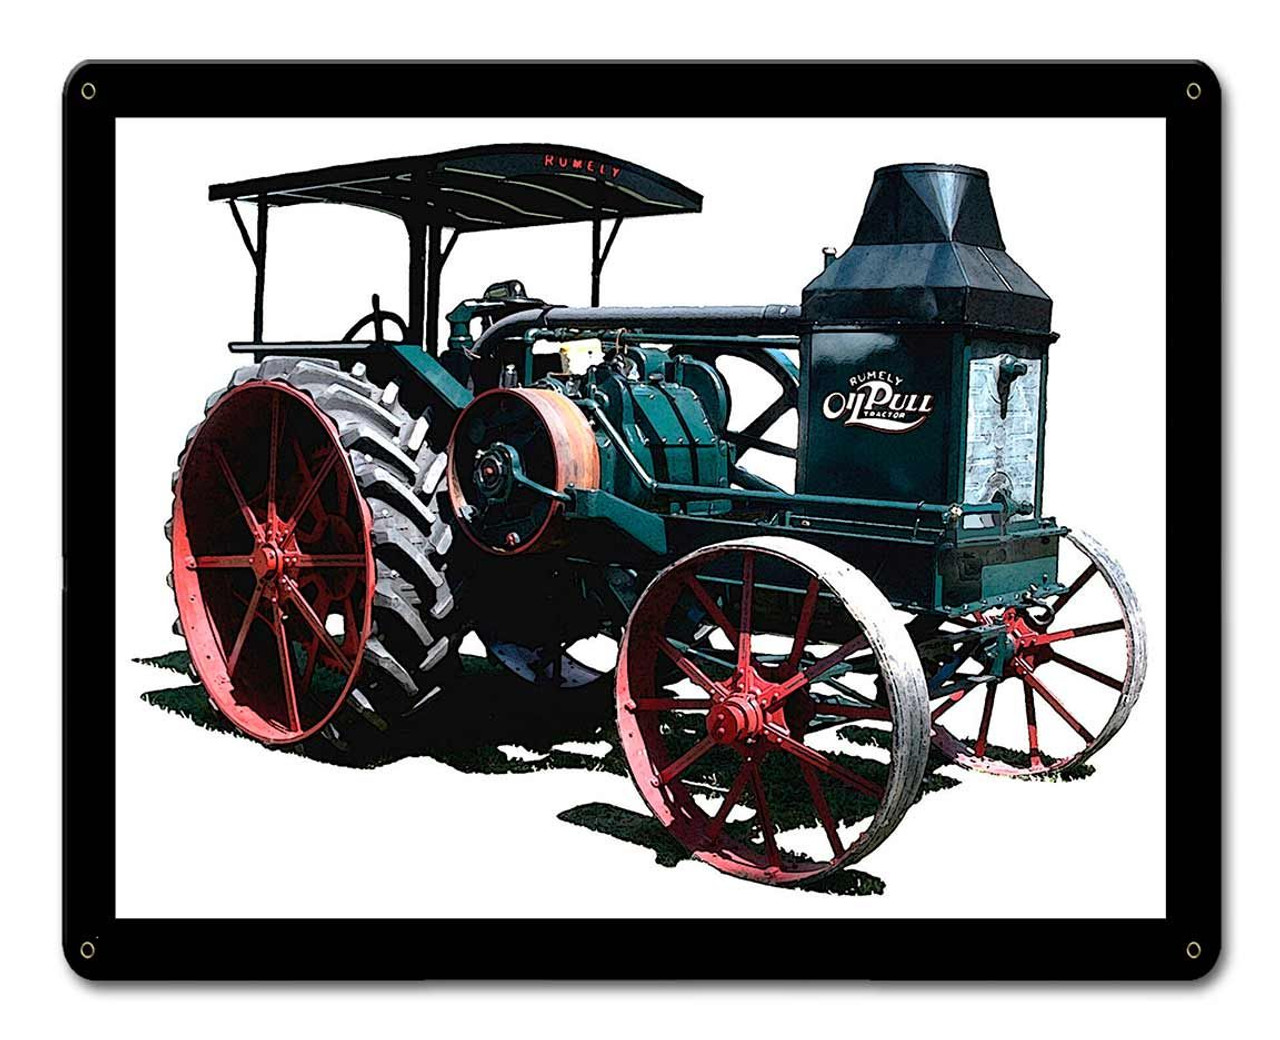 Advance Rumely Oil Pull Tractor Metal Sign 15 x 12 Inches